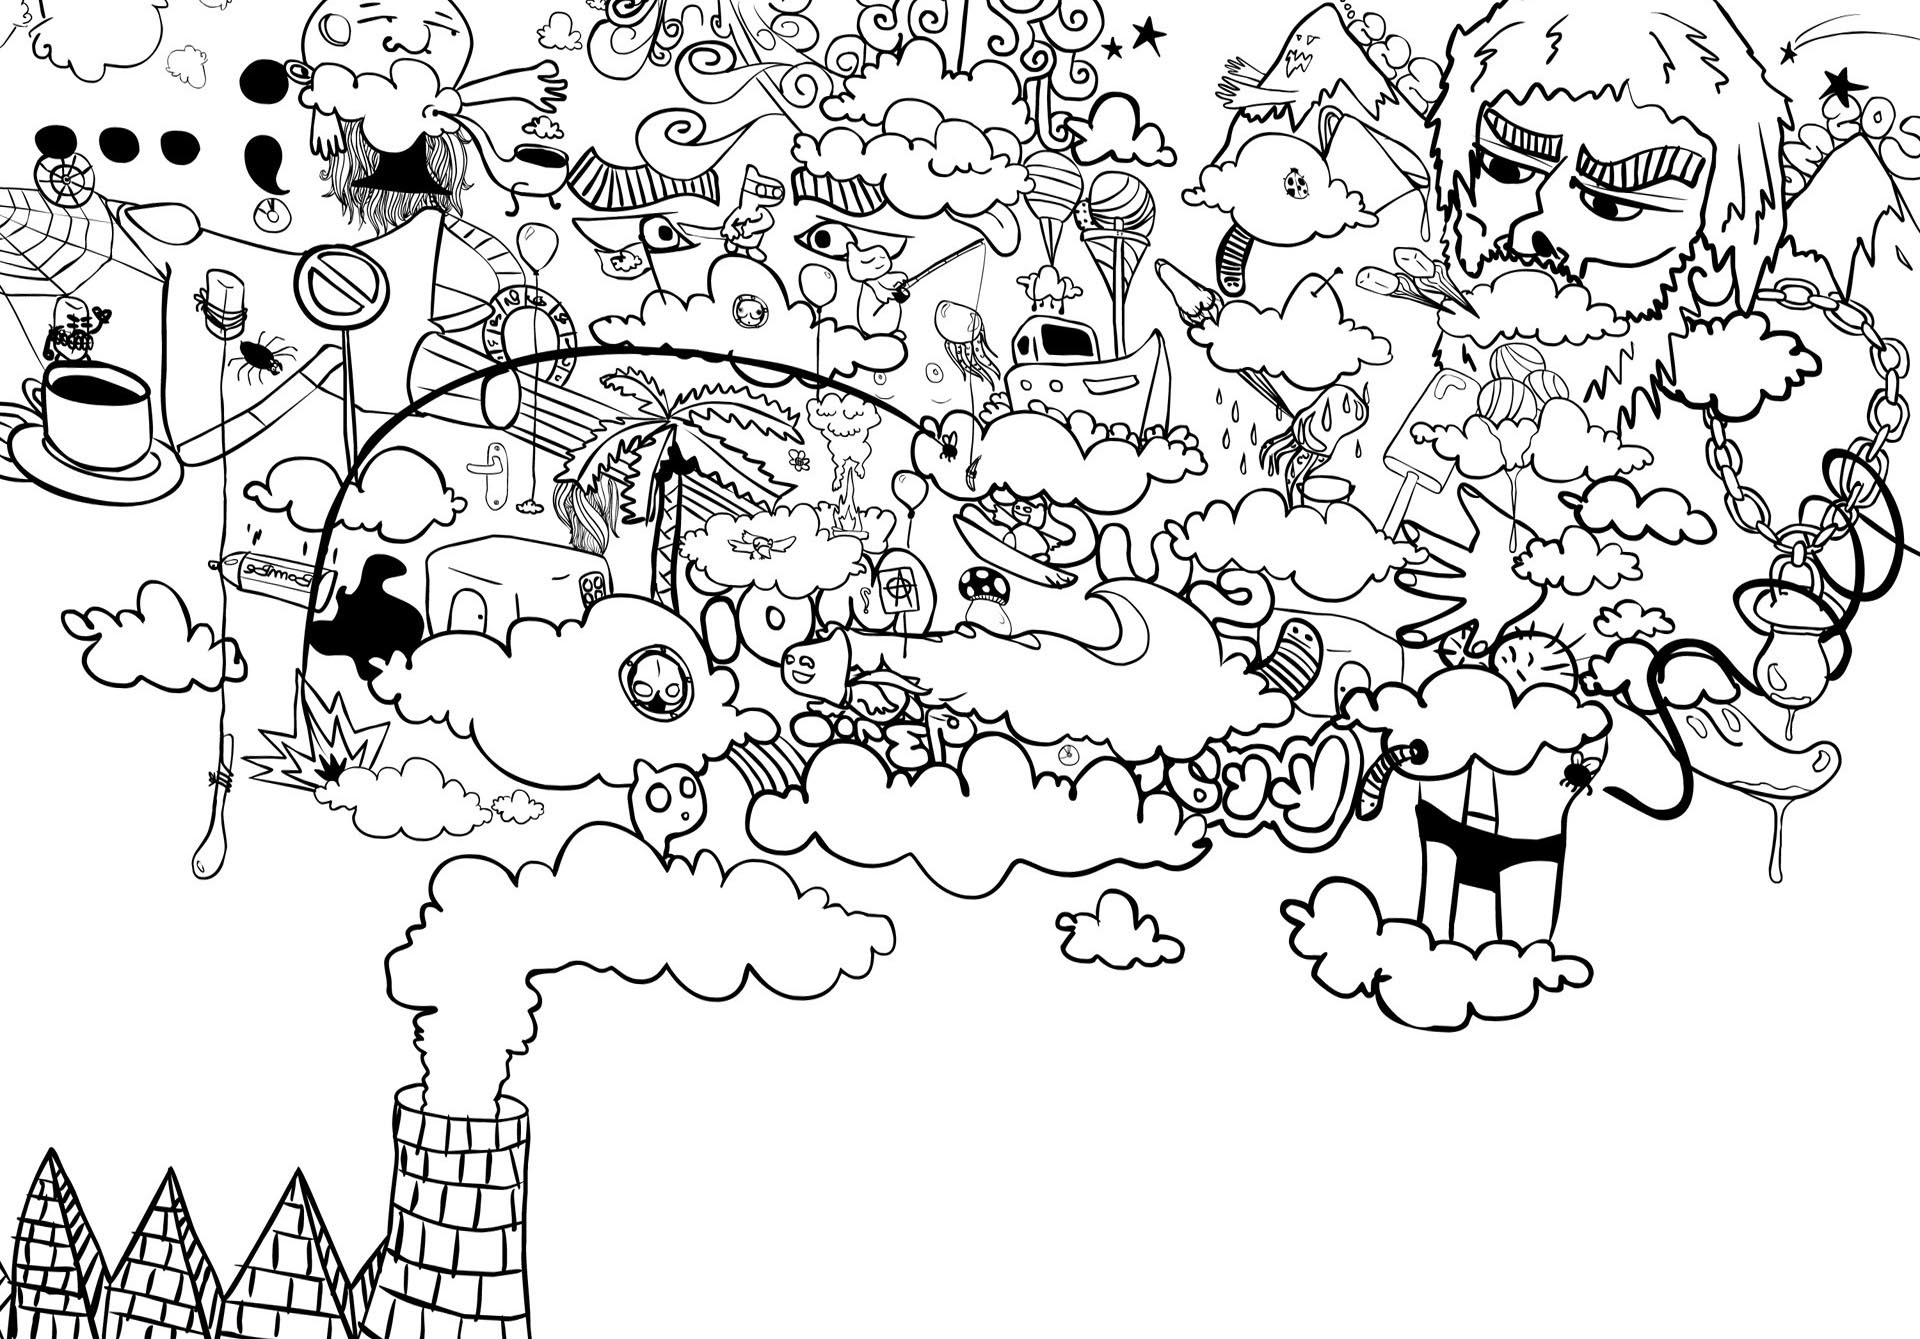 Wallpaper, drawing, illustration, monochrome, artwork, text, line art, cartoon, pattern, head, movie characters, ART, tree, area, point, design, artworks, black and white, vertebrate, fictional character, font, organ, fiction, organism, coloring book